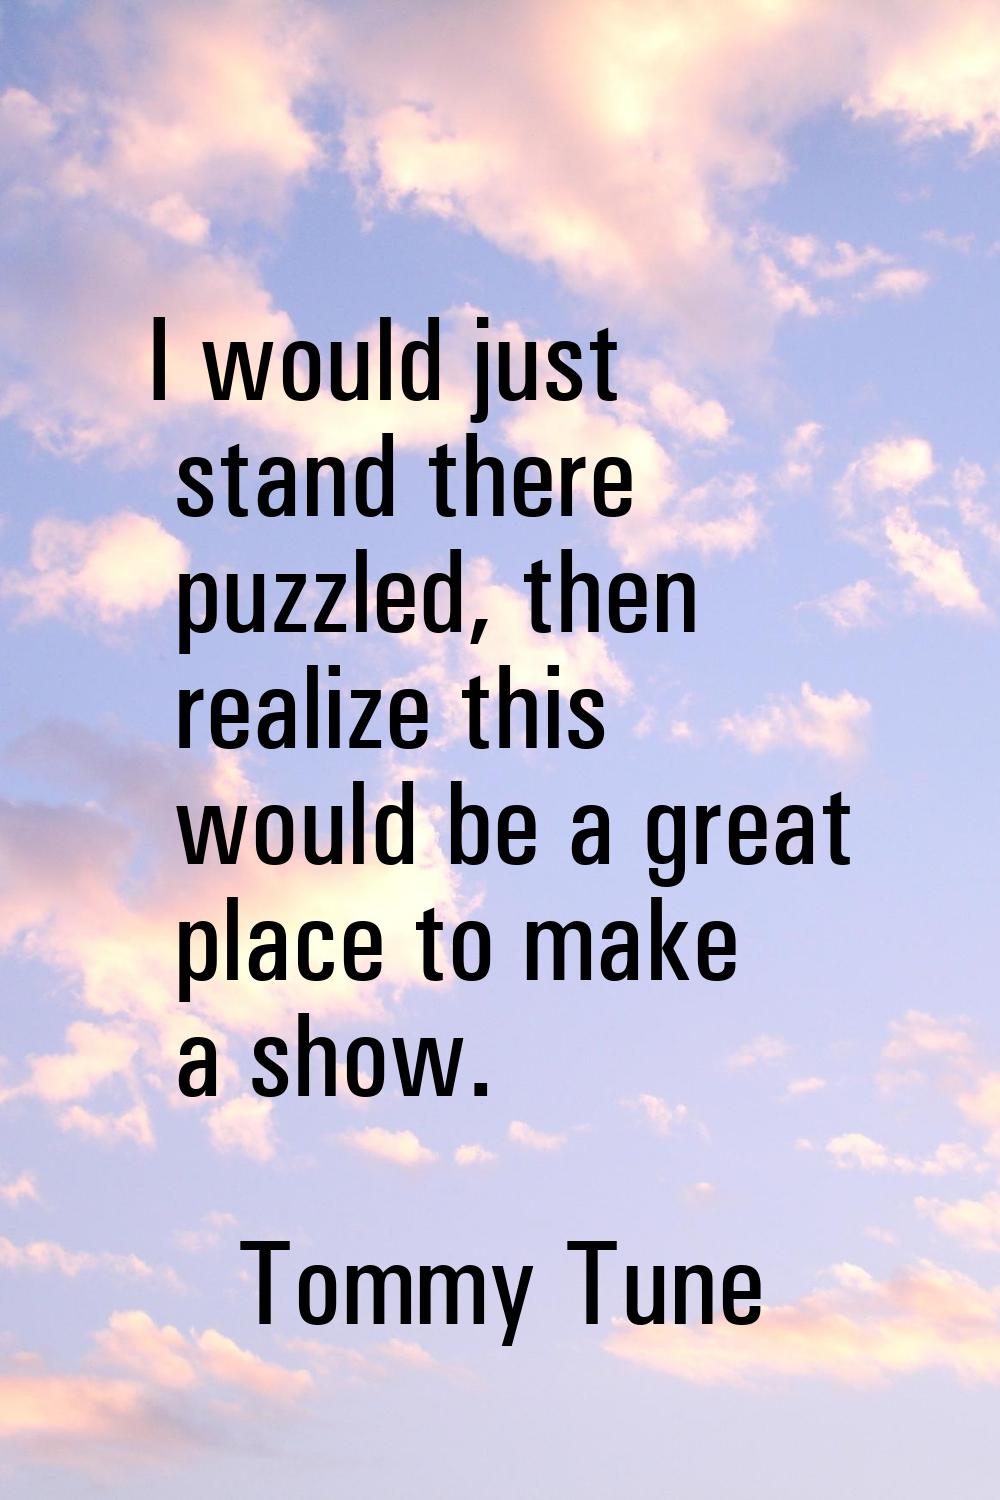 I would just stand there puzzled, then realize this would be a great place to make a show.